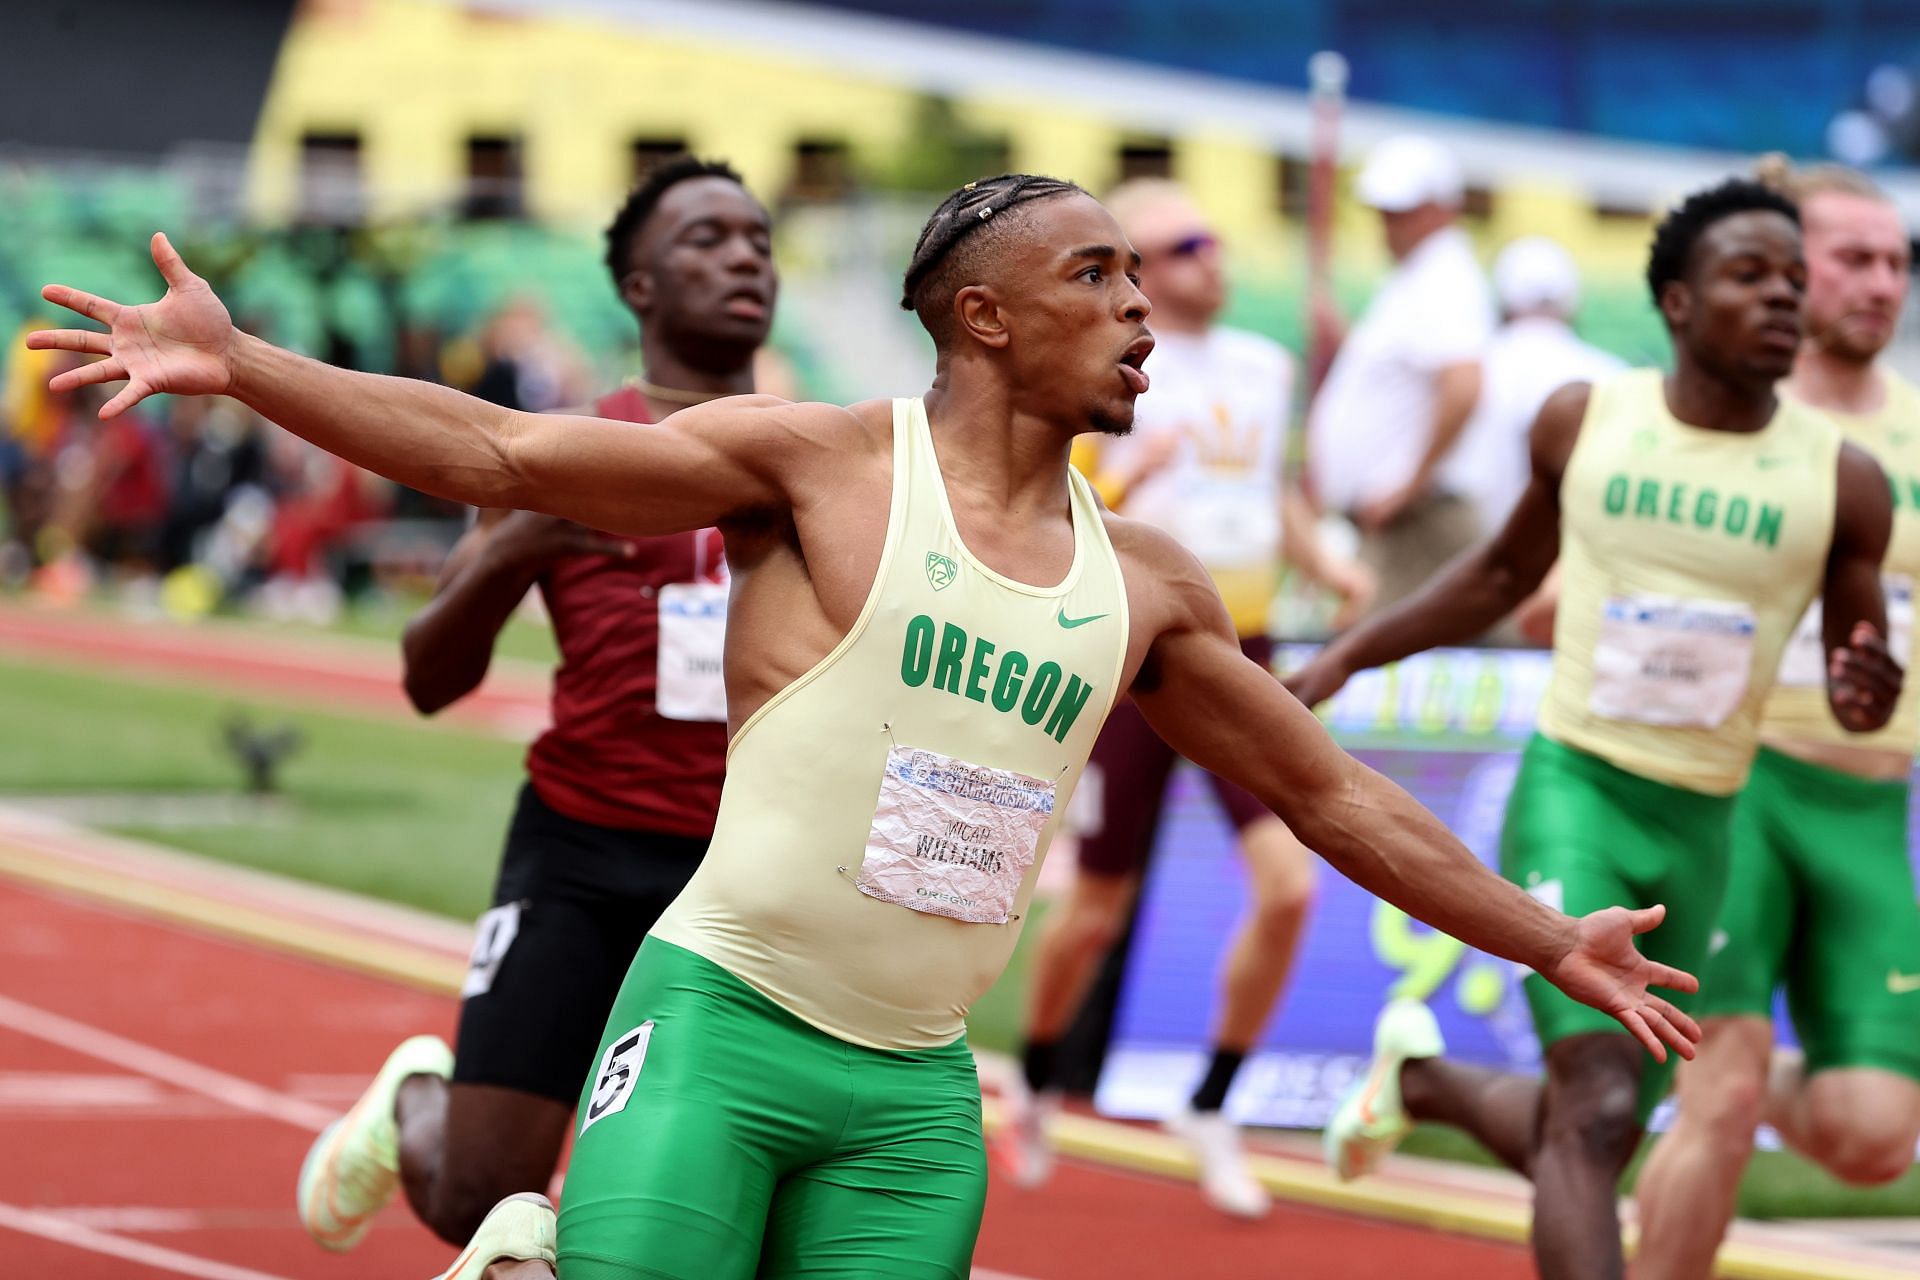 Micah Williams for Oregon during Pac-12 meet